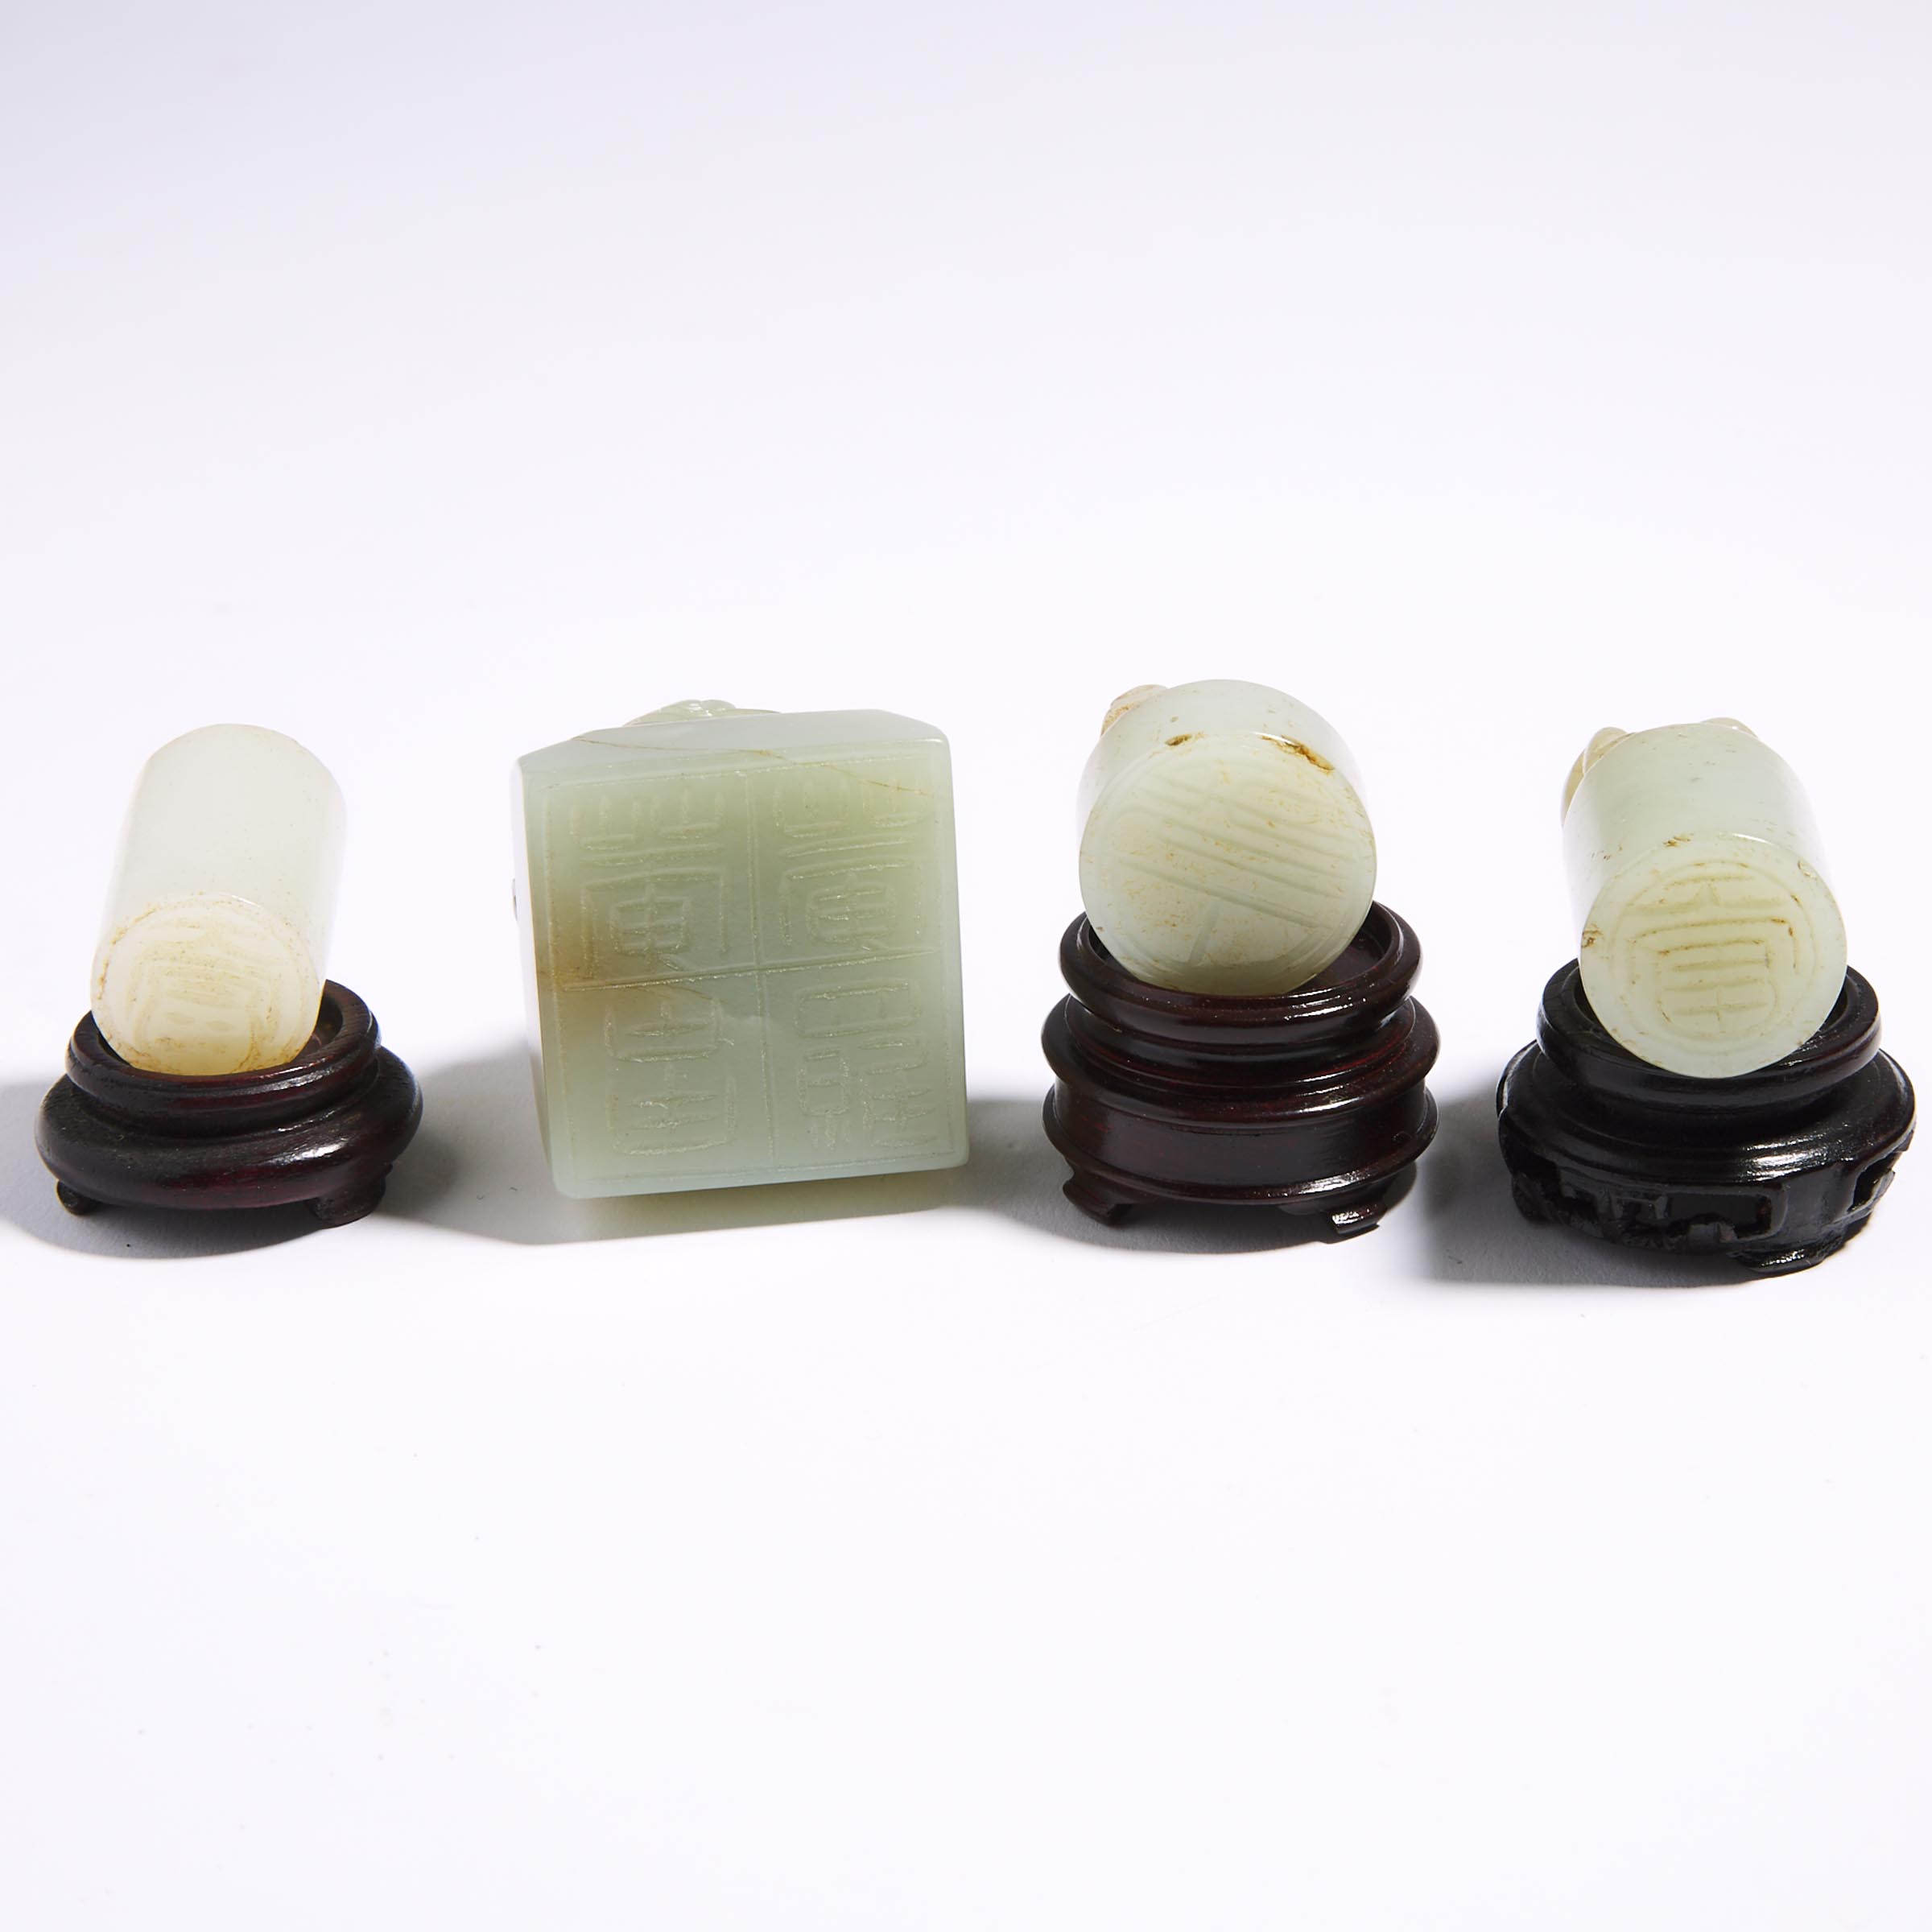 A Group of Four Celadon Jade Carved Seals